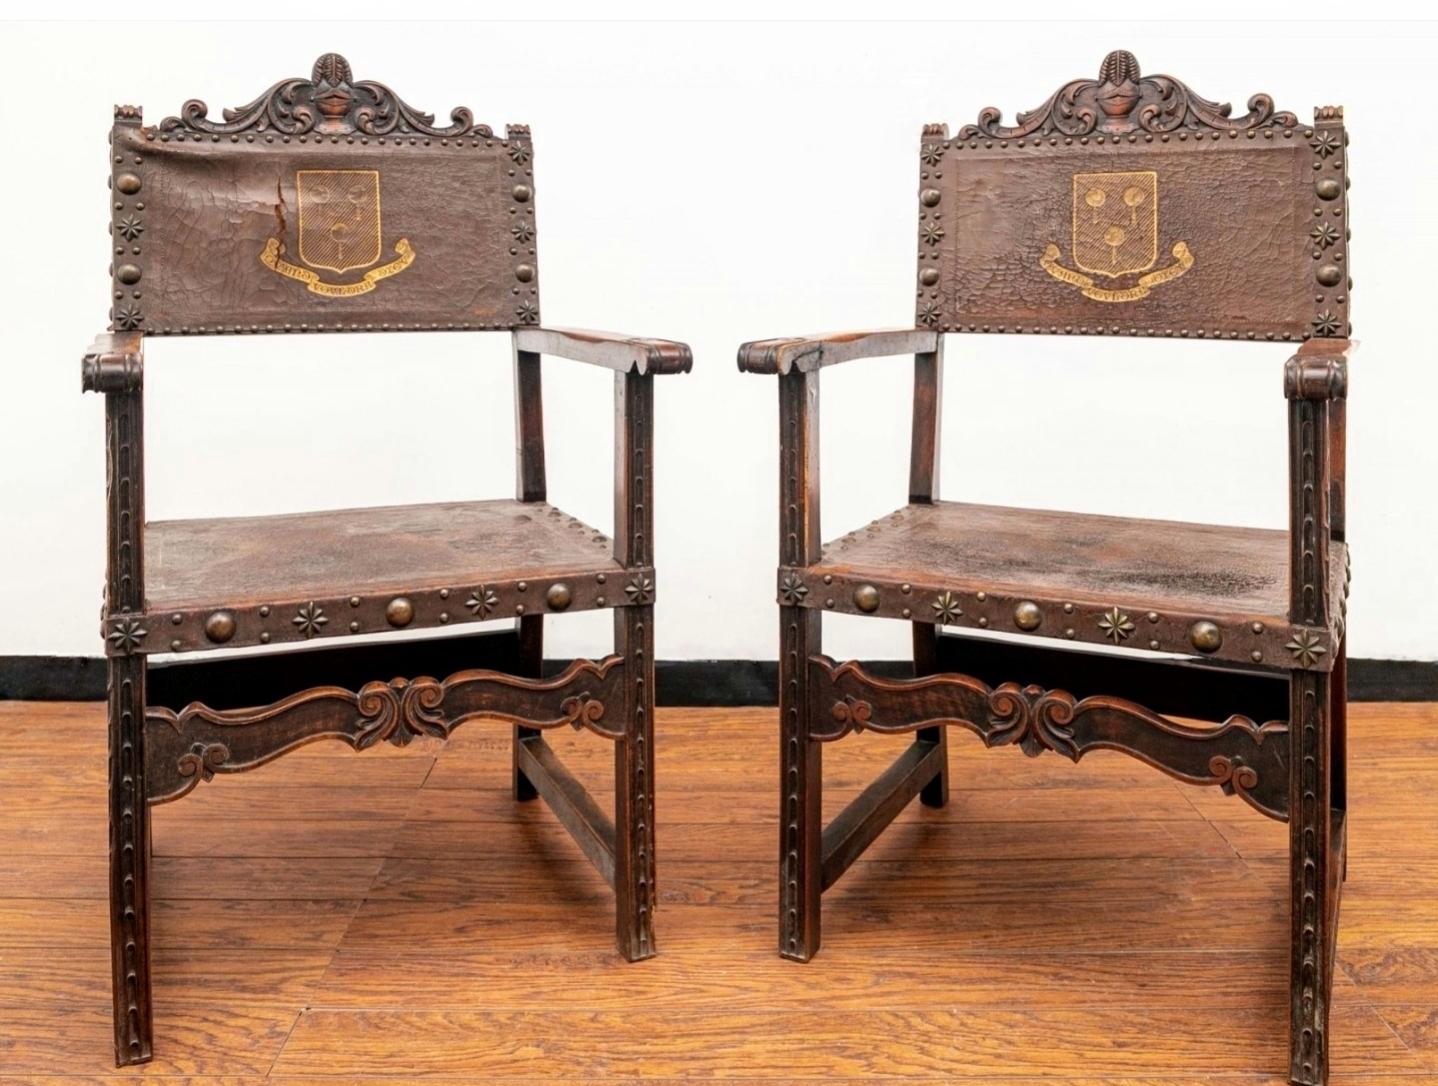 A pair of antique English Renaissance Revival leather and walnut hall chairs.

19th century, British Isles, featuring gilt family armorial shield and scroll banner with Latin inscription adorning the backrest.

Simple square Medieval European throne